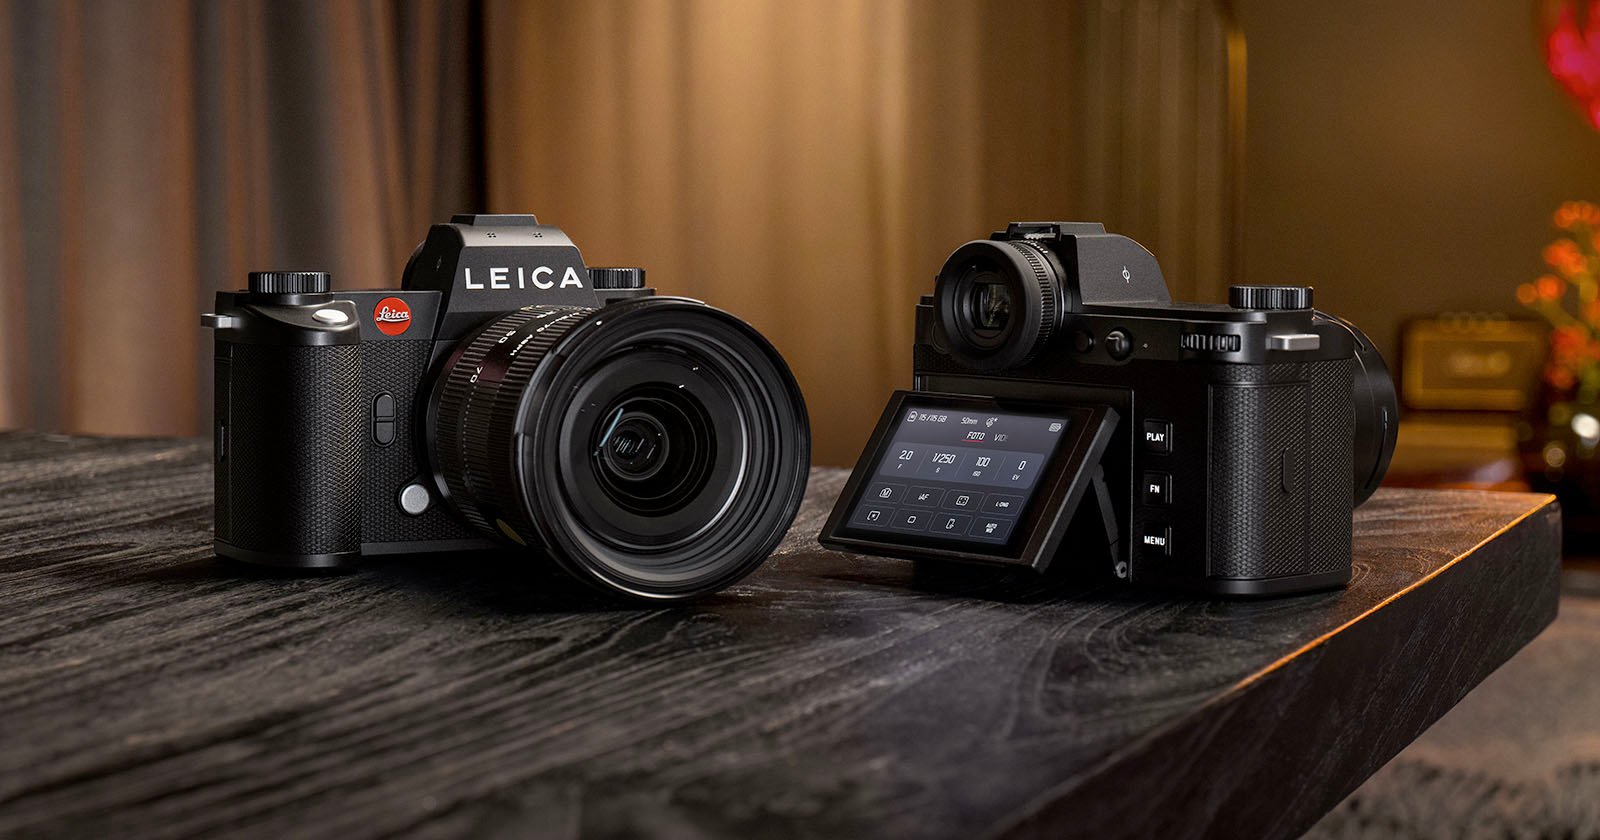  leica selling l-mount cameras tougher than 